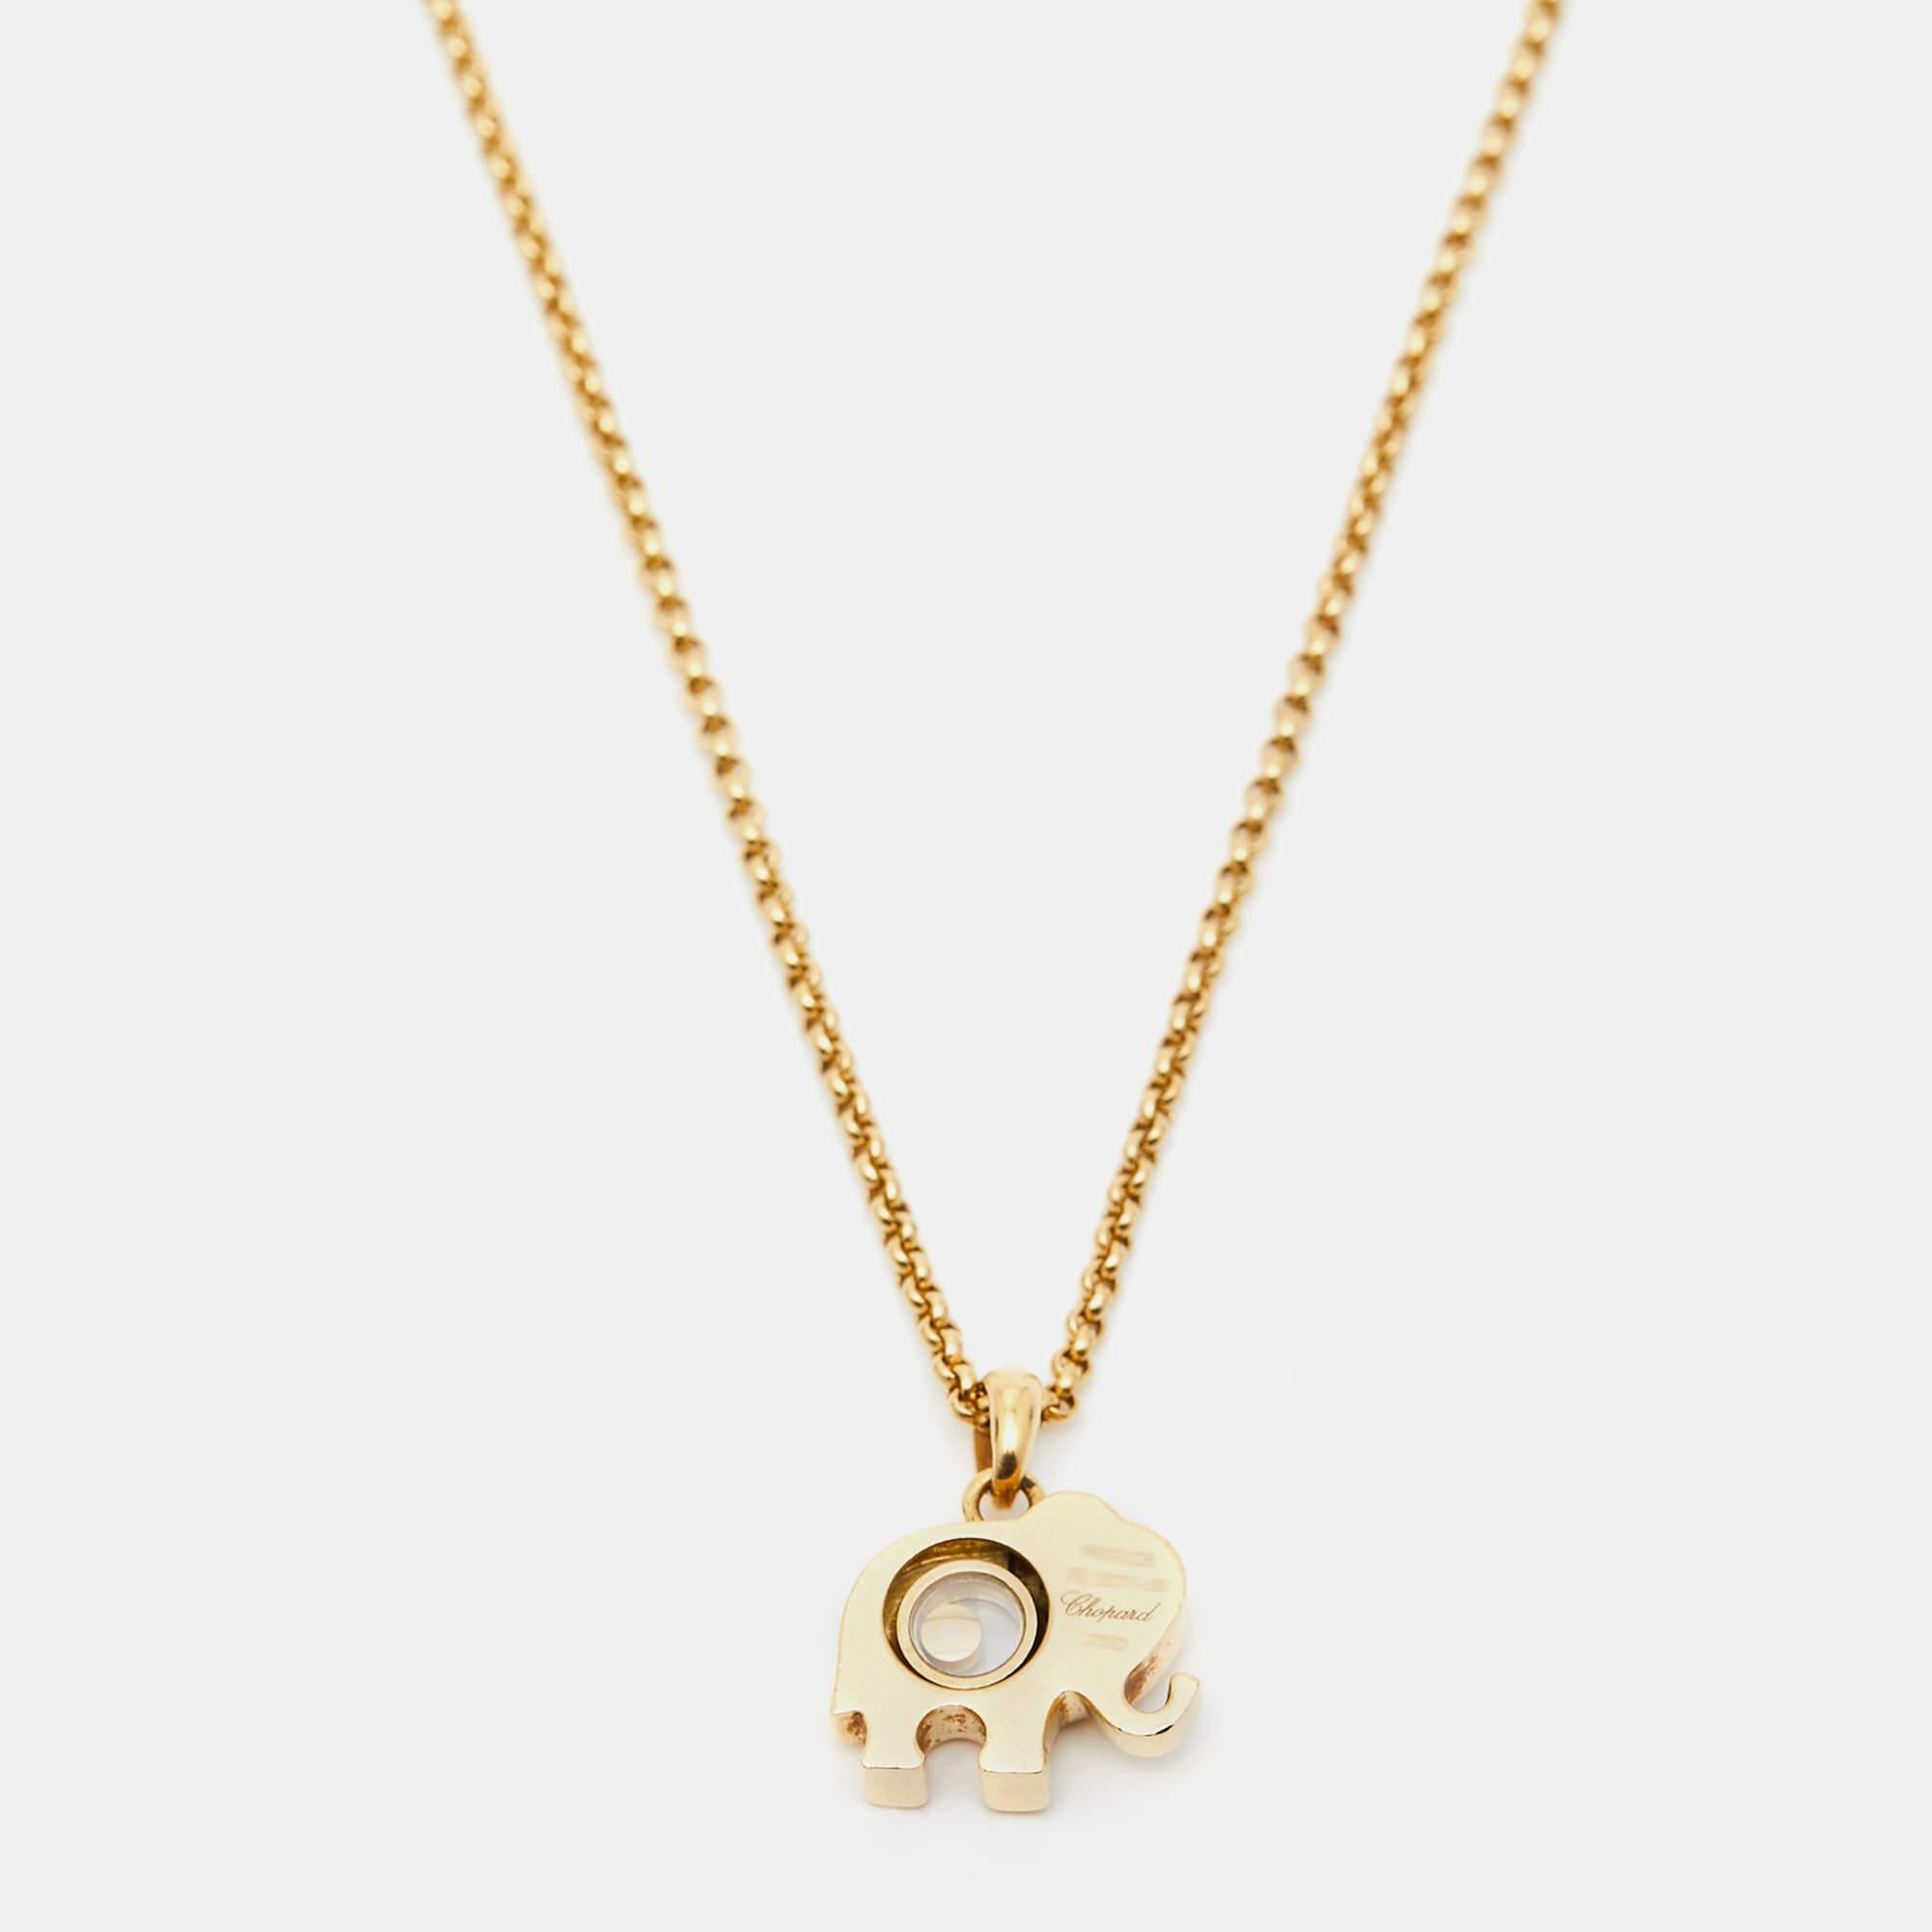 A playful twist to add to your everyday jewelry collection, this Chopard necklace is such a thing of beauty. Crafted using 18k yellow gold, the chain holds a diamond-studded elephant motif with a moving diamond dancing between two sapphire crystals,